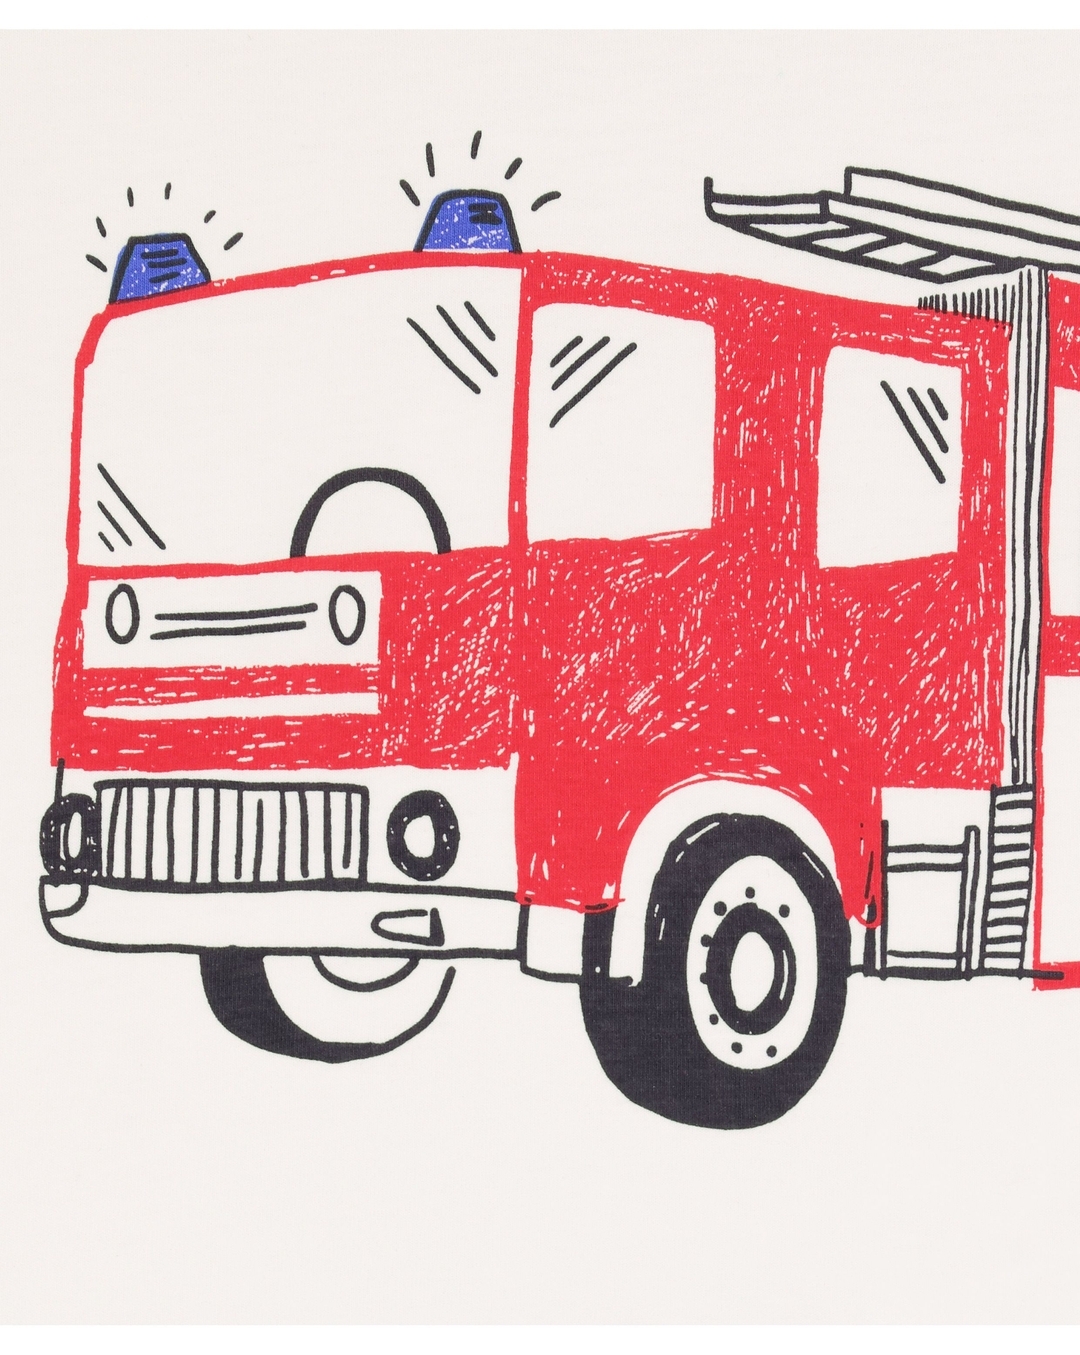 How to draw a firetruck?